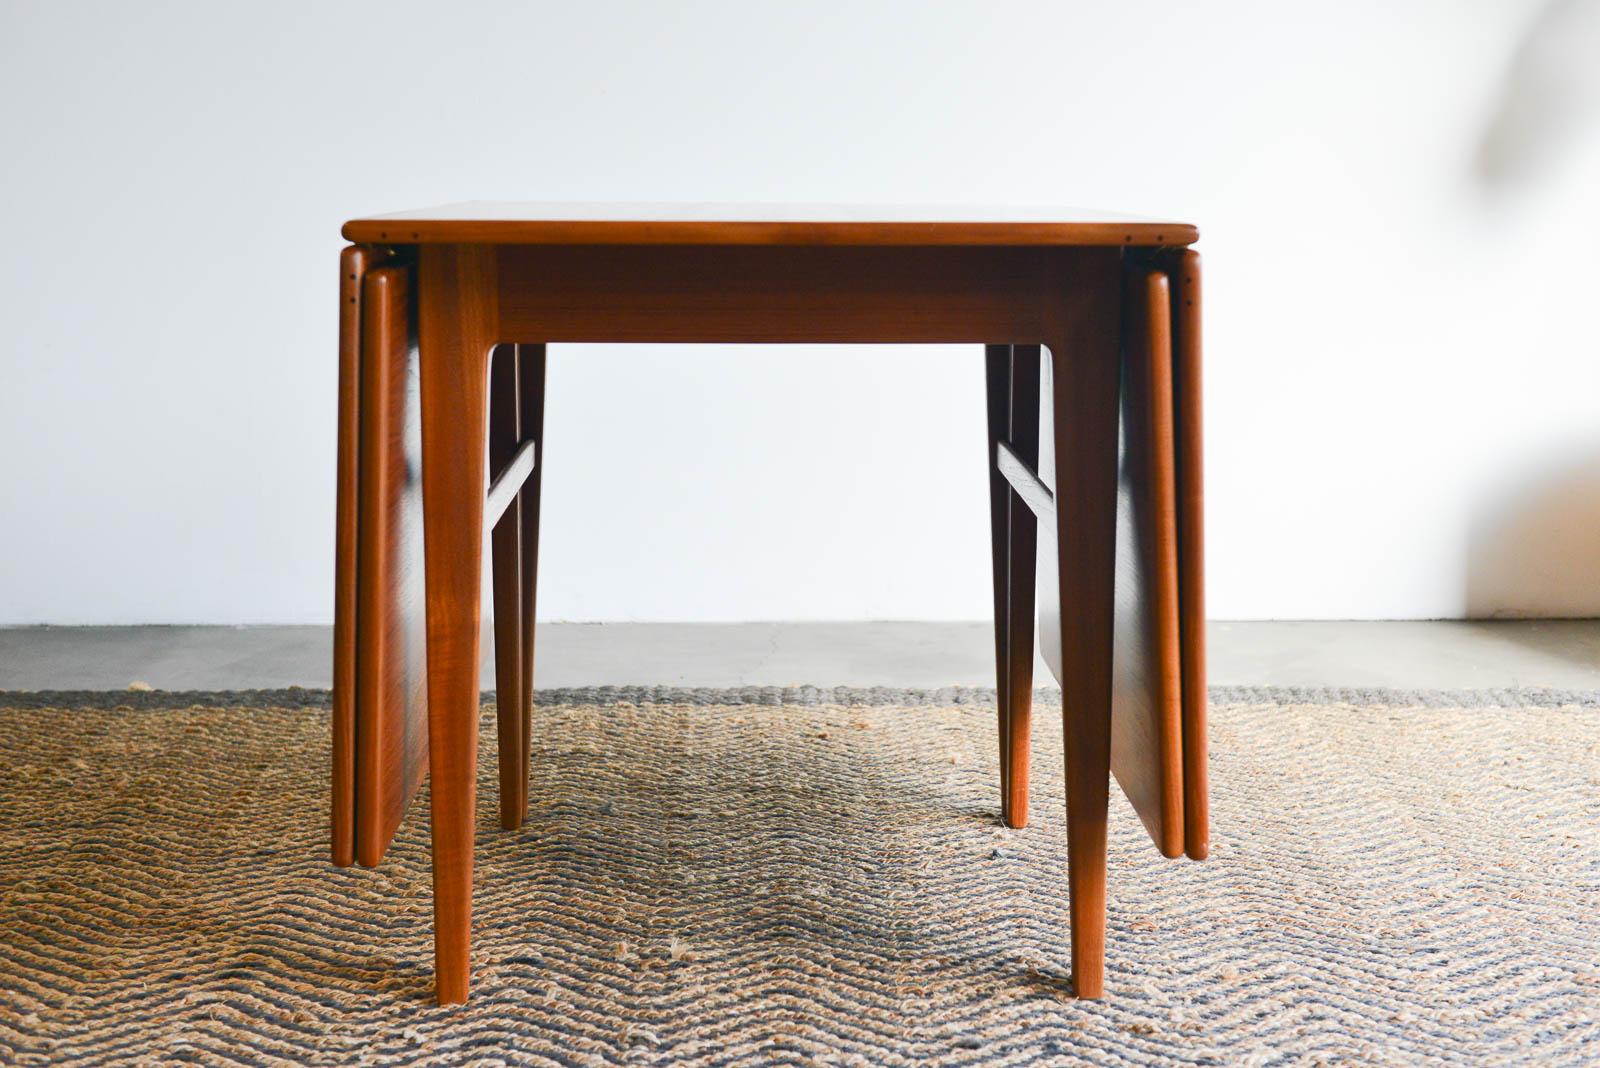 Expandable teak dining table by Erik Worts, Denmark, circa 1960. Erik Worts was a master cabinetmaker who sold his pieces through Den Permanente in Copenhagen. Den was a collective of artisans who sold handcrafted pieces to the public. This table is